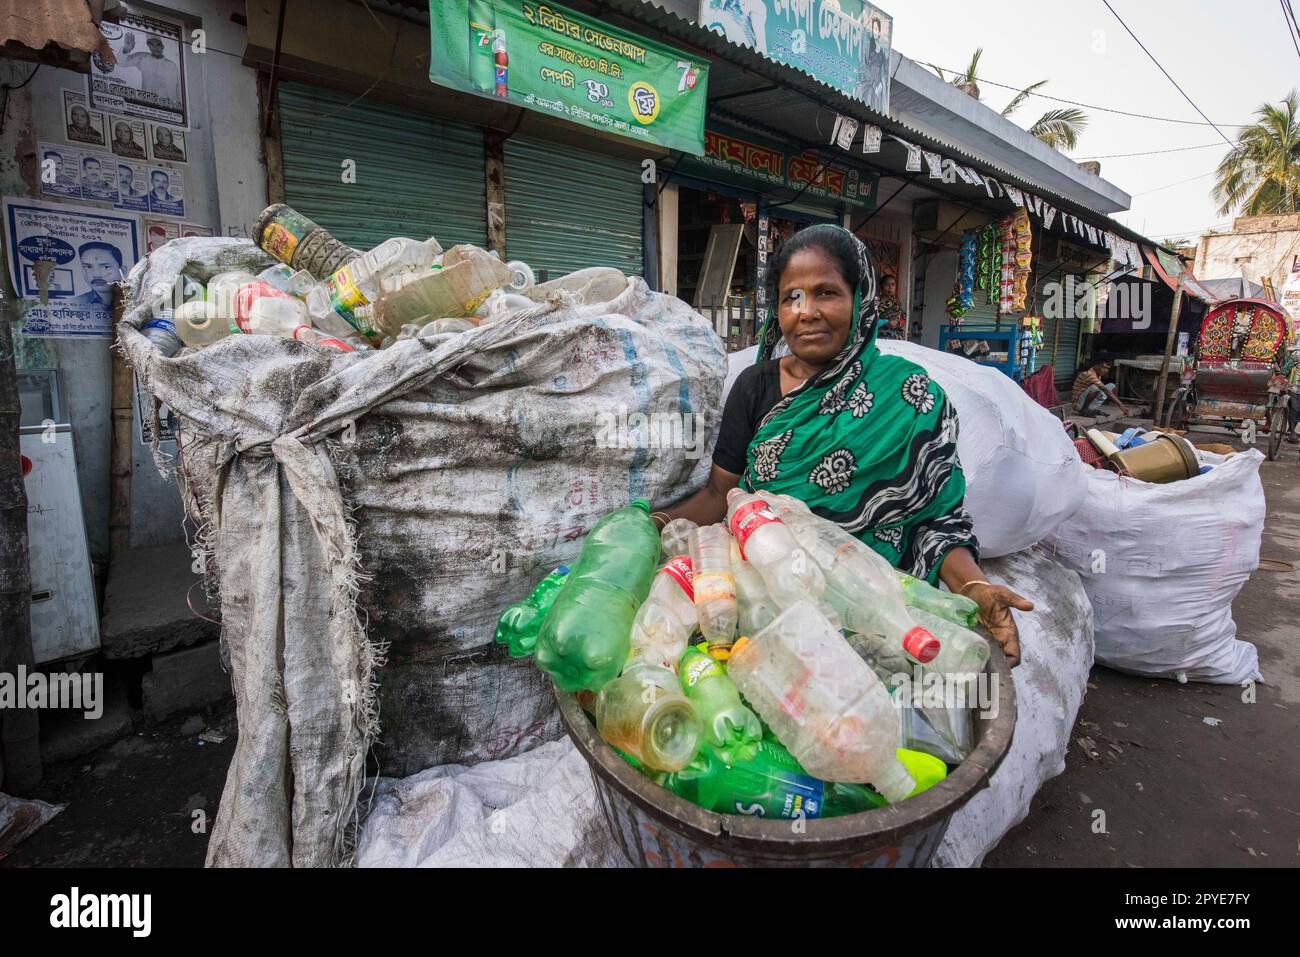 Bangladesh, Khulna, Sonadanga. A woman works collecting recycled bottles in the streets of Bangladesh. March 19, 2017. Editorial use only. Stock Photo